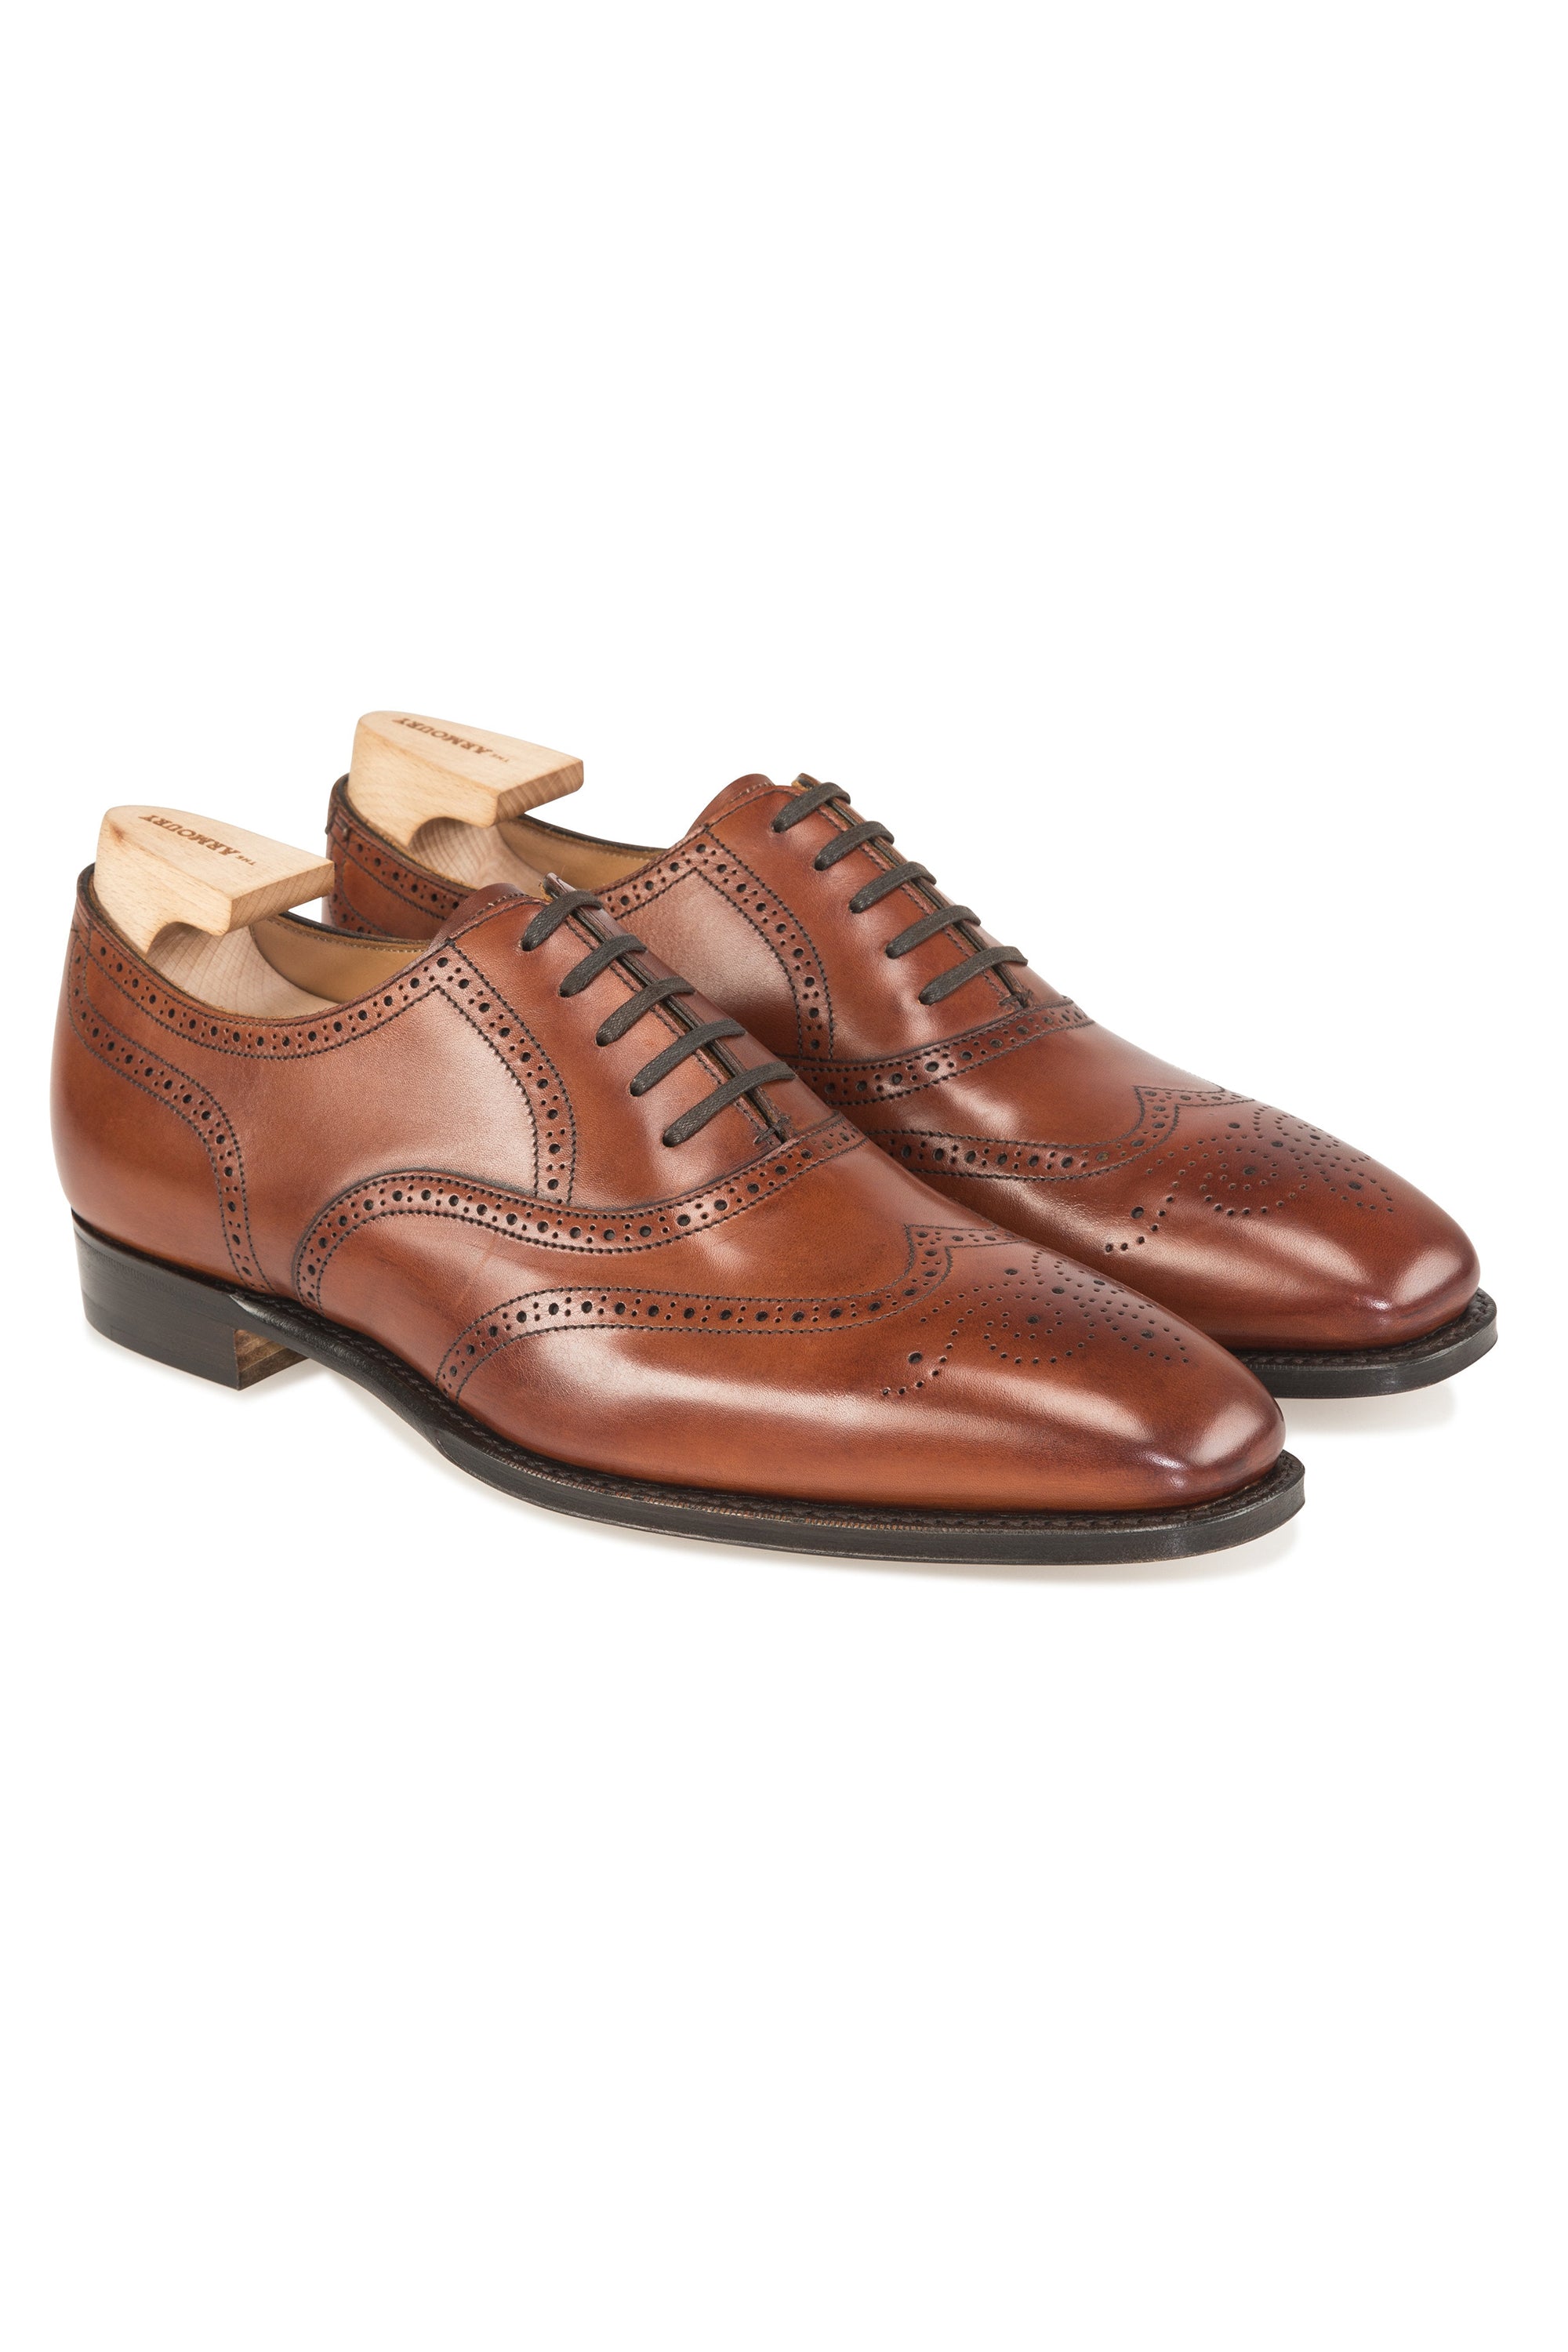 The Armoury Hajime 101579 Gloucester Chestnut Calf Oxford Shoes *factory seconds*